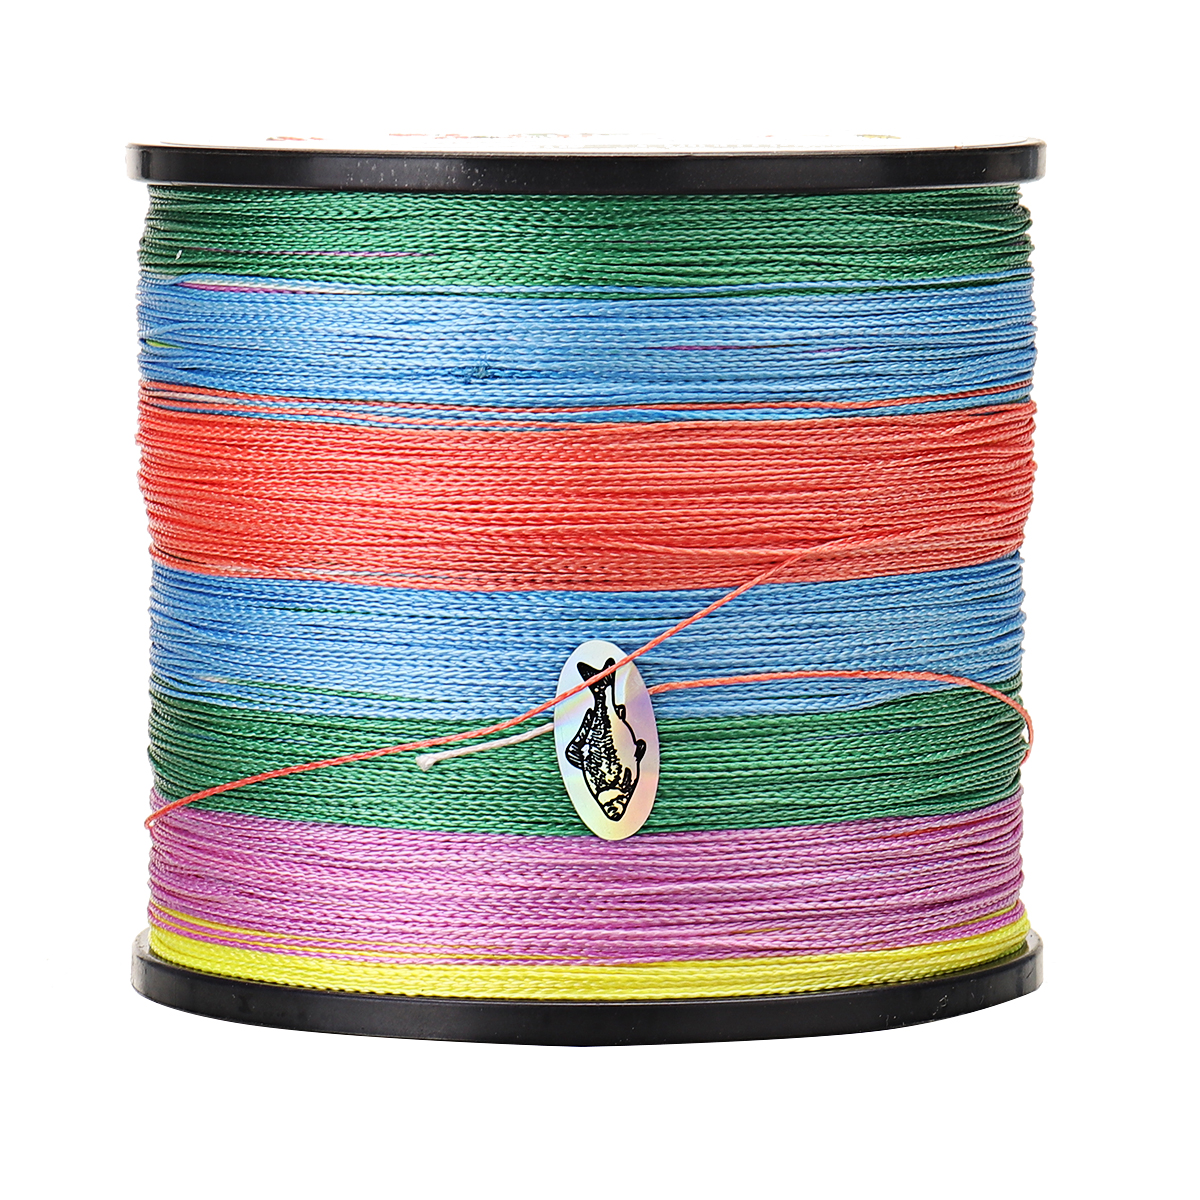 ZANLURE-Super-Strong-Braided-Fishing-Line-1000m-4-Strands-PE-Braid-1015305580130lbs-Fishing-Tackle-1837670-7